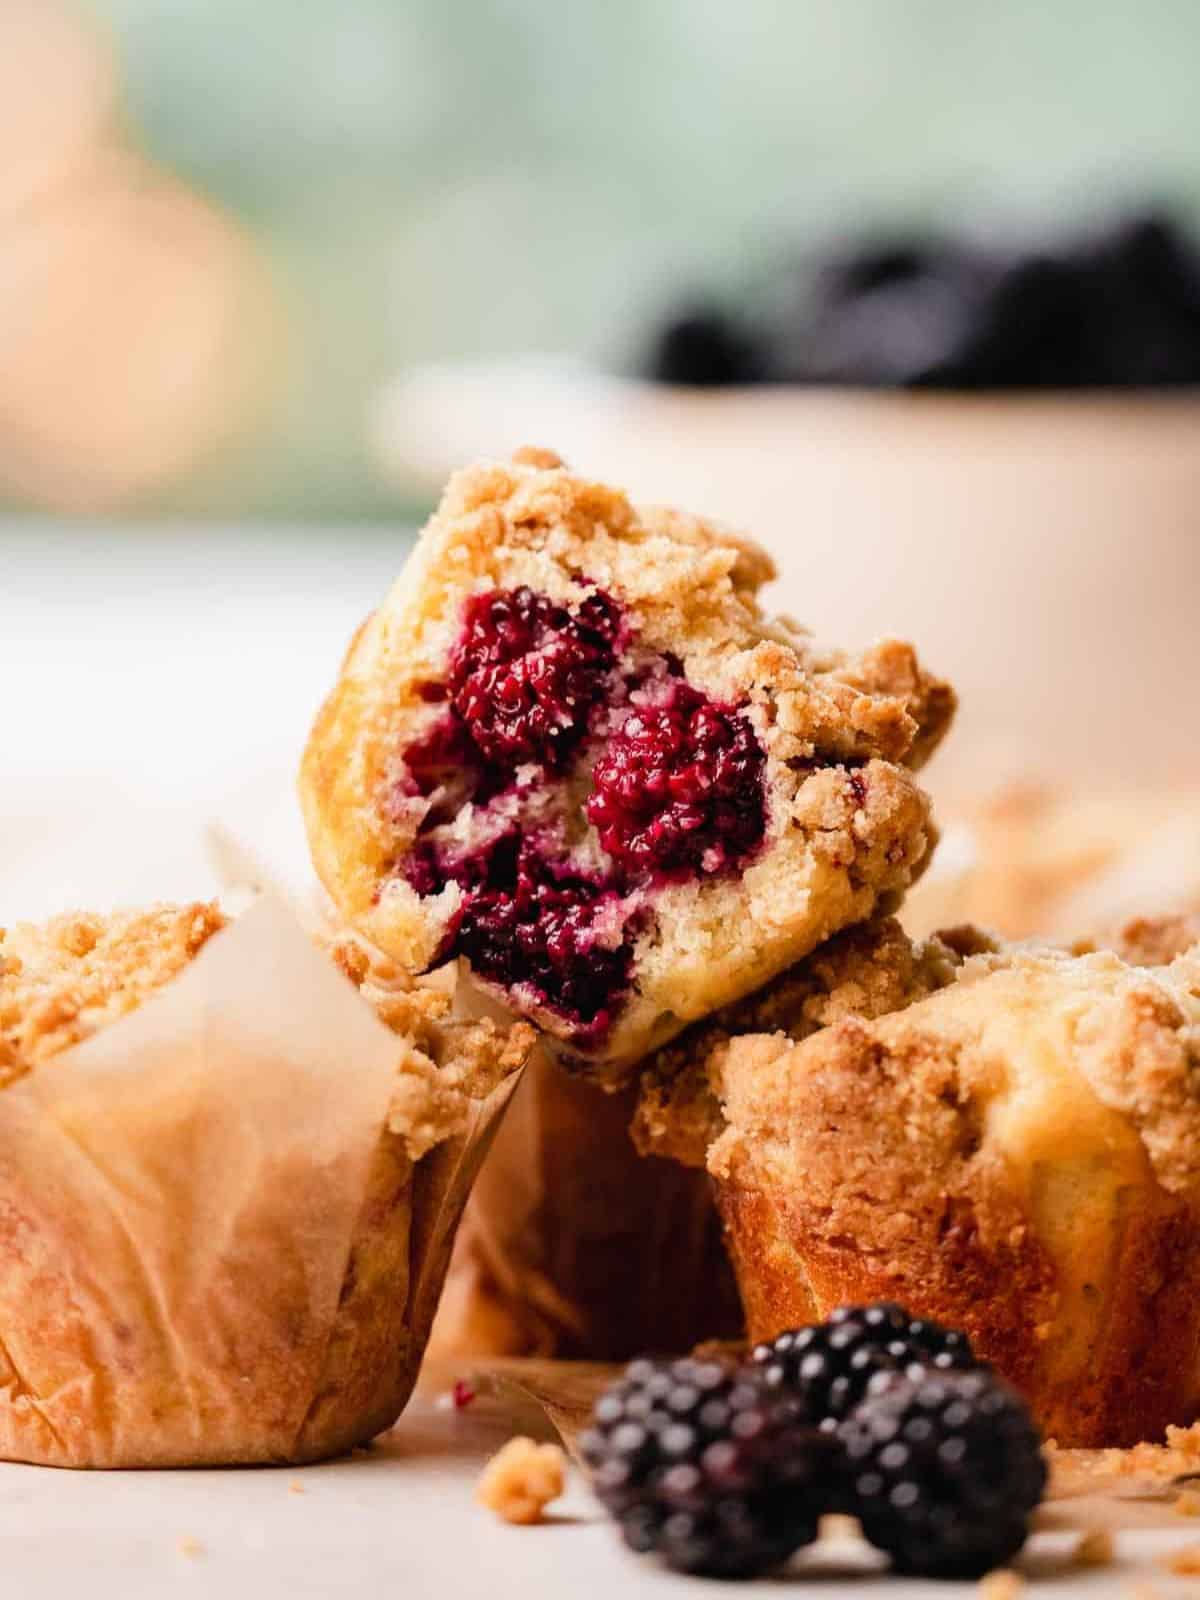 Gorgeous Blackberry Muffins with Crumble on Top.